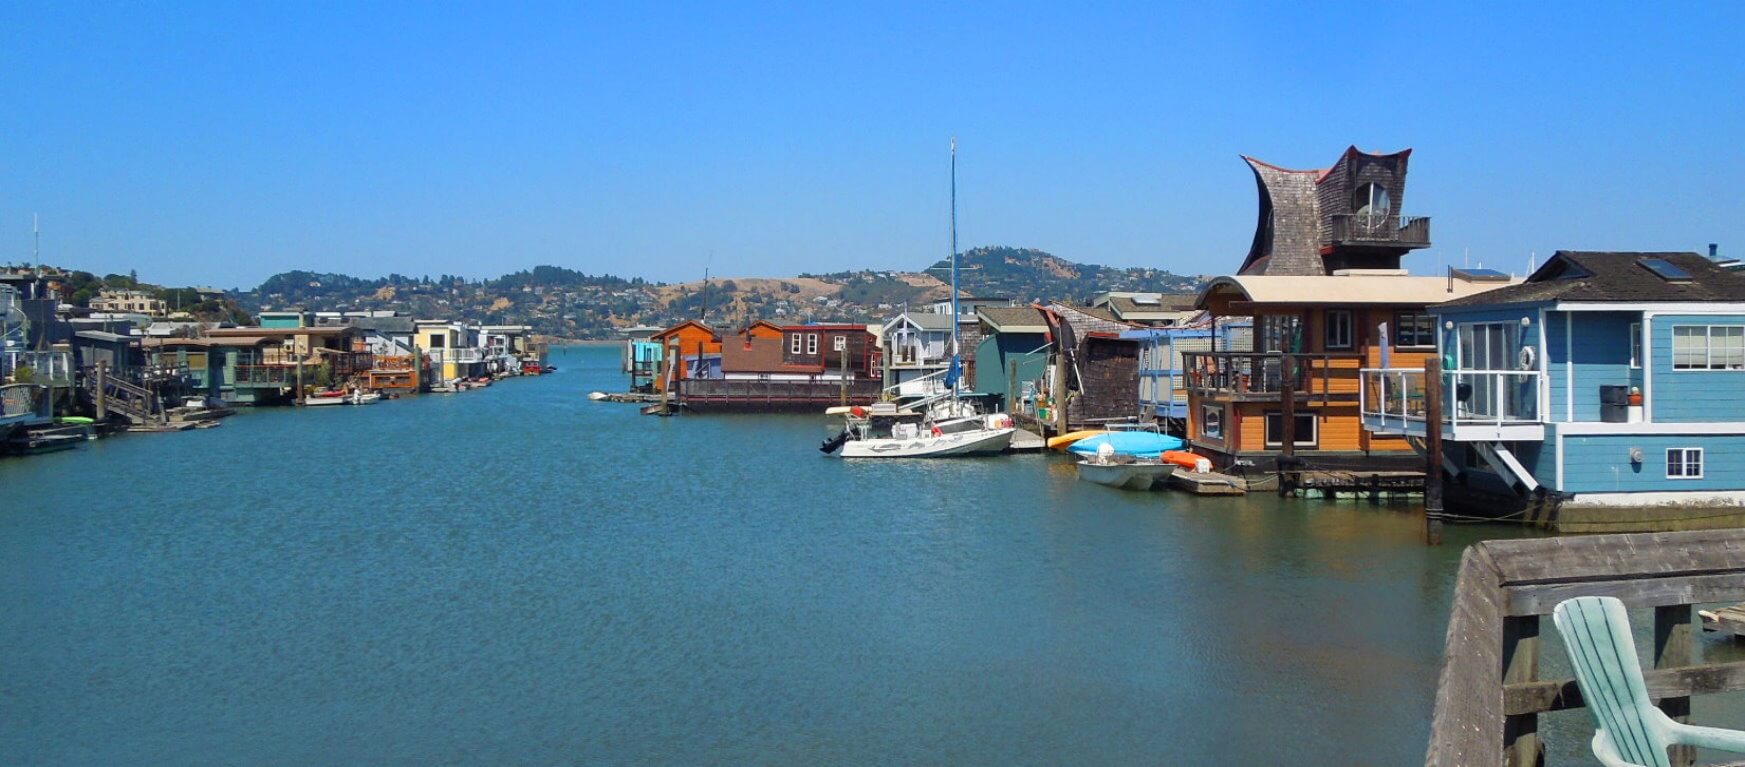 sausalito-house-boats-tour-muirwoods-day-trip-from-sanfrancisco